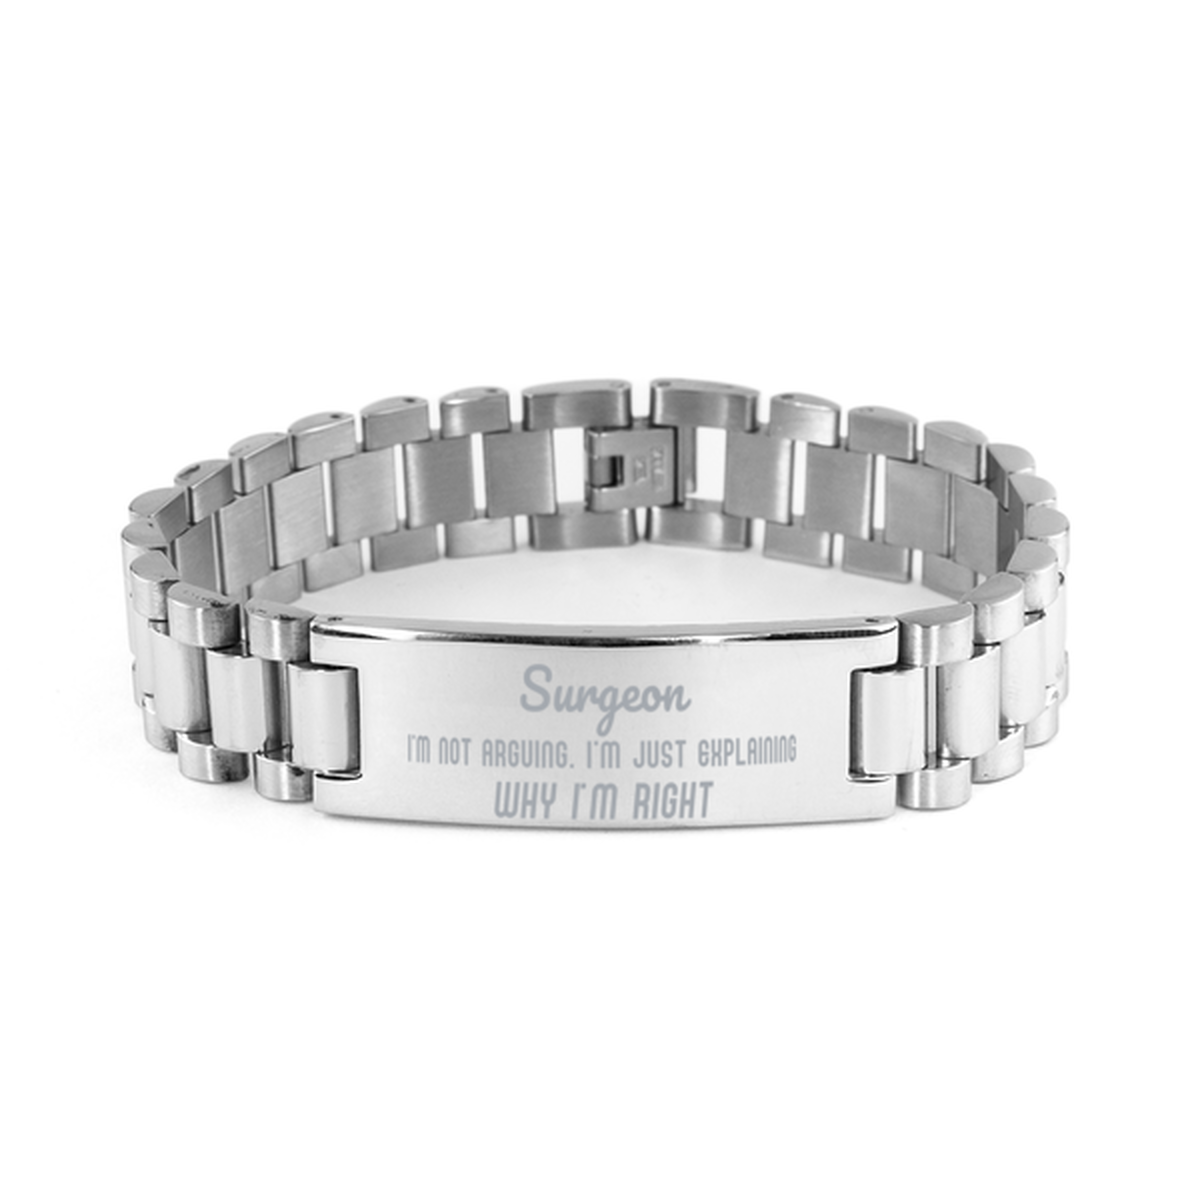 Surgeon I'm not Arguing. I'm Just Explaining Why I'm RIGHT Ladder Stainless Steel Bracelet, Graduation Birthday Christmas Surgeon Gifts For Surgeon Funny Saying Quote Present for Men Women Coworker